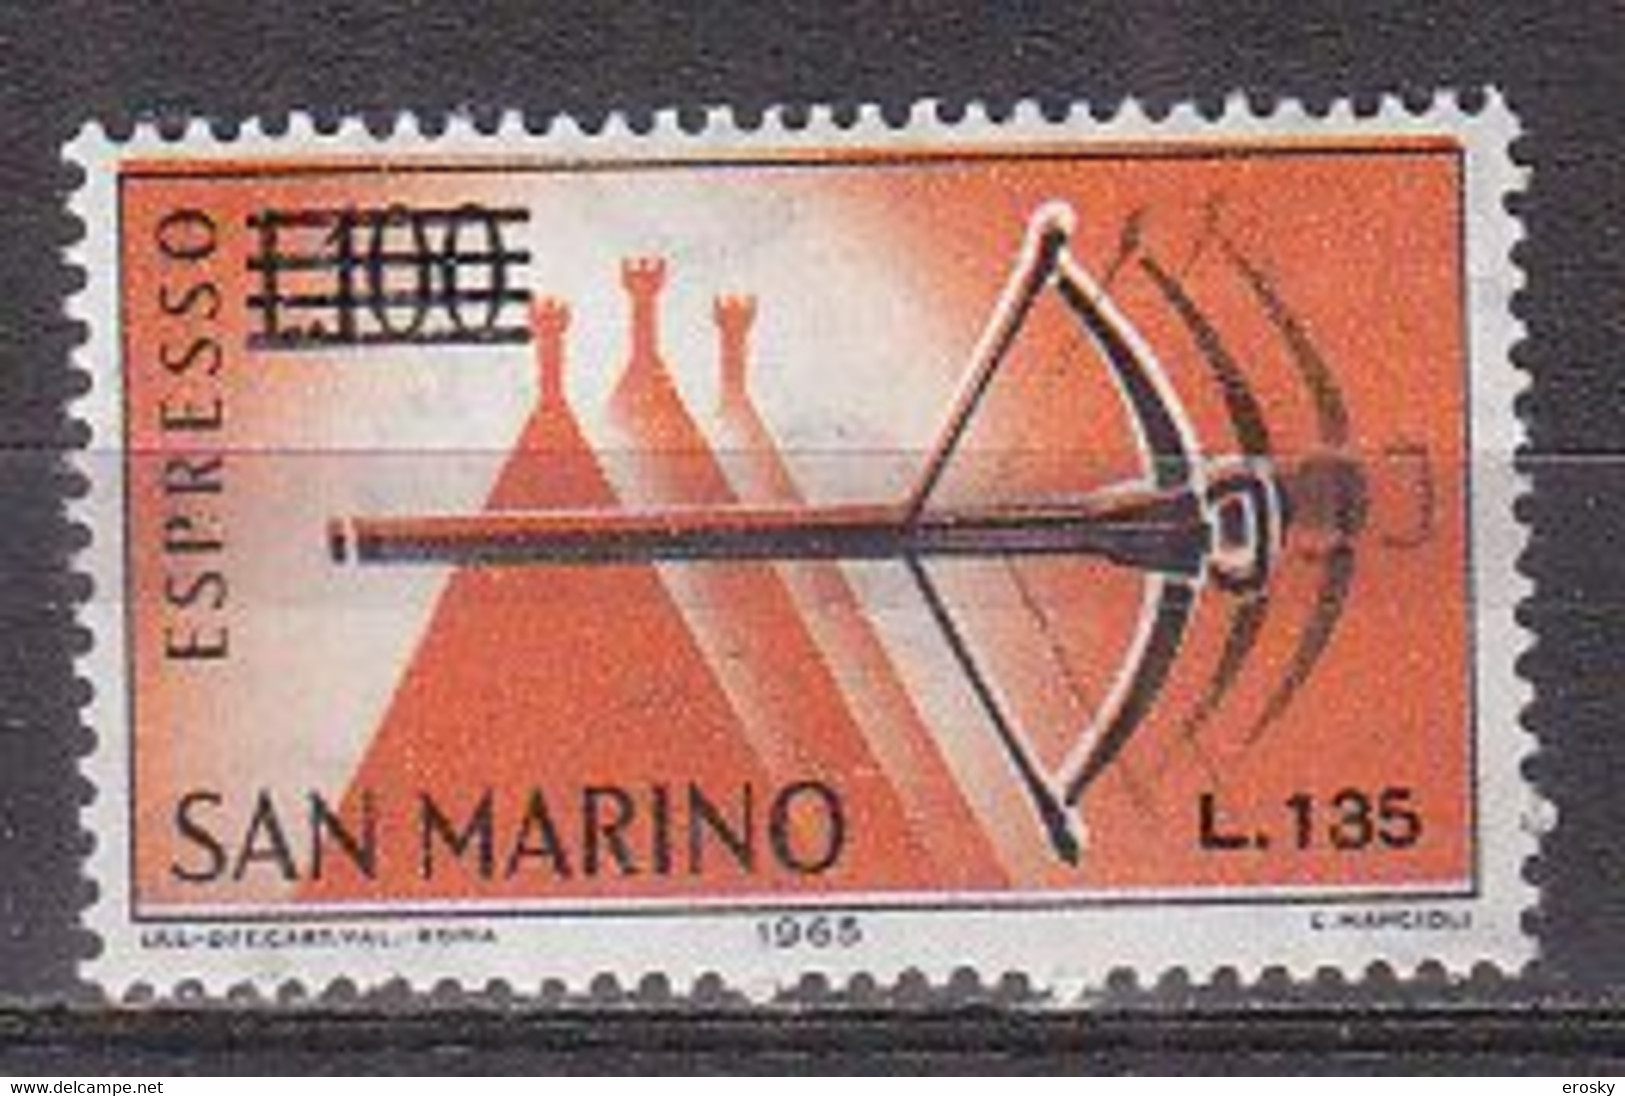 Y9242 - SAN MARINO Espresso Ss N°26 - SAINT-MARIN Expres Yv N°29 ** - Express Letter Stamps